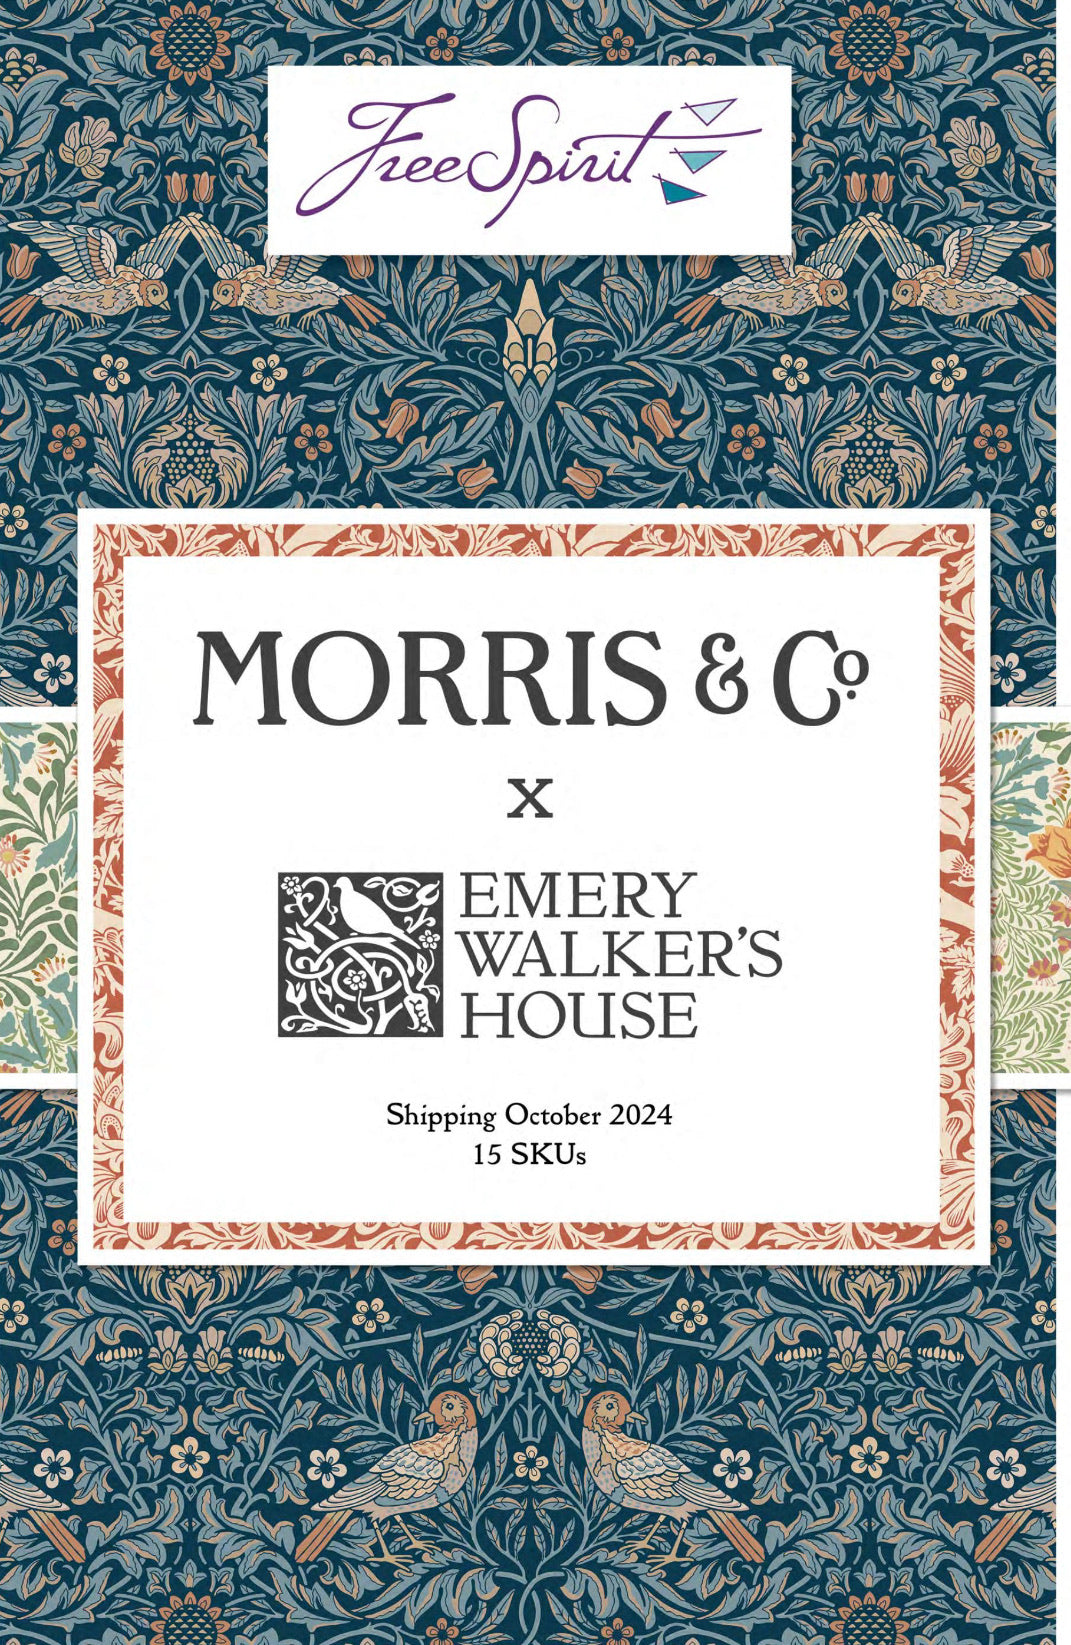 COMING OCTOBER 2024 - Emery Walker's House by Morris & Co